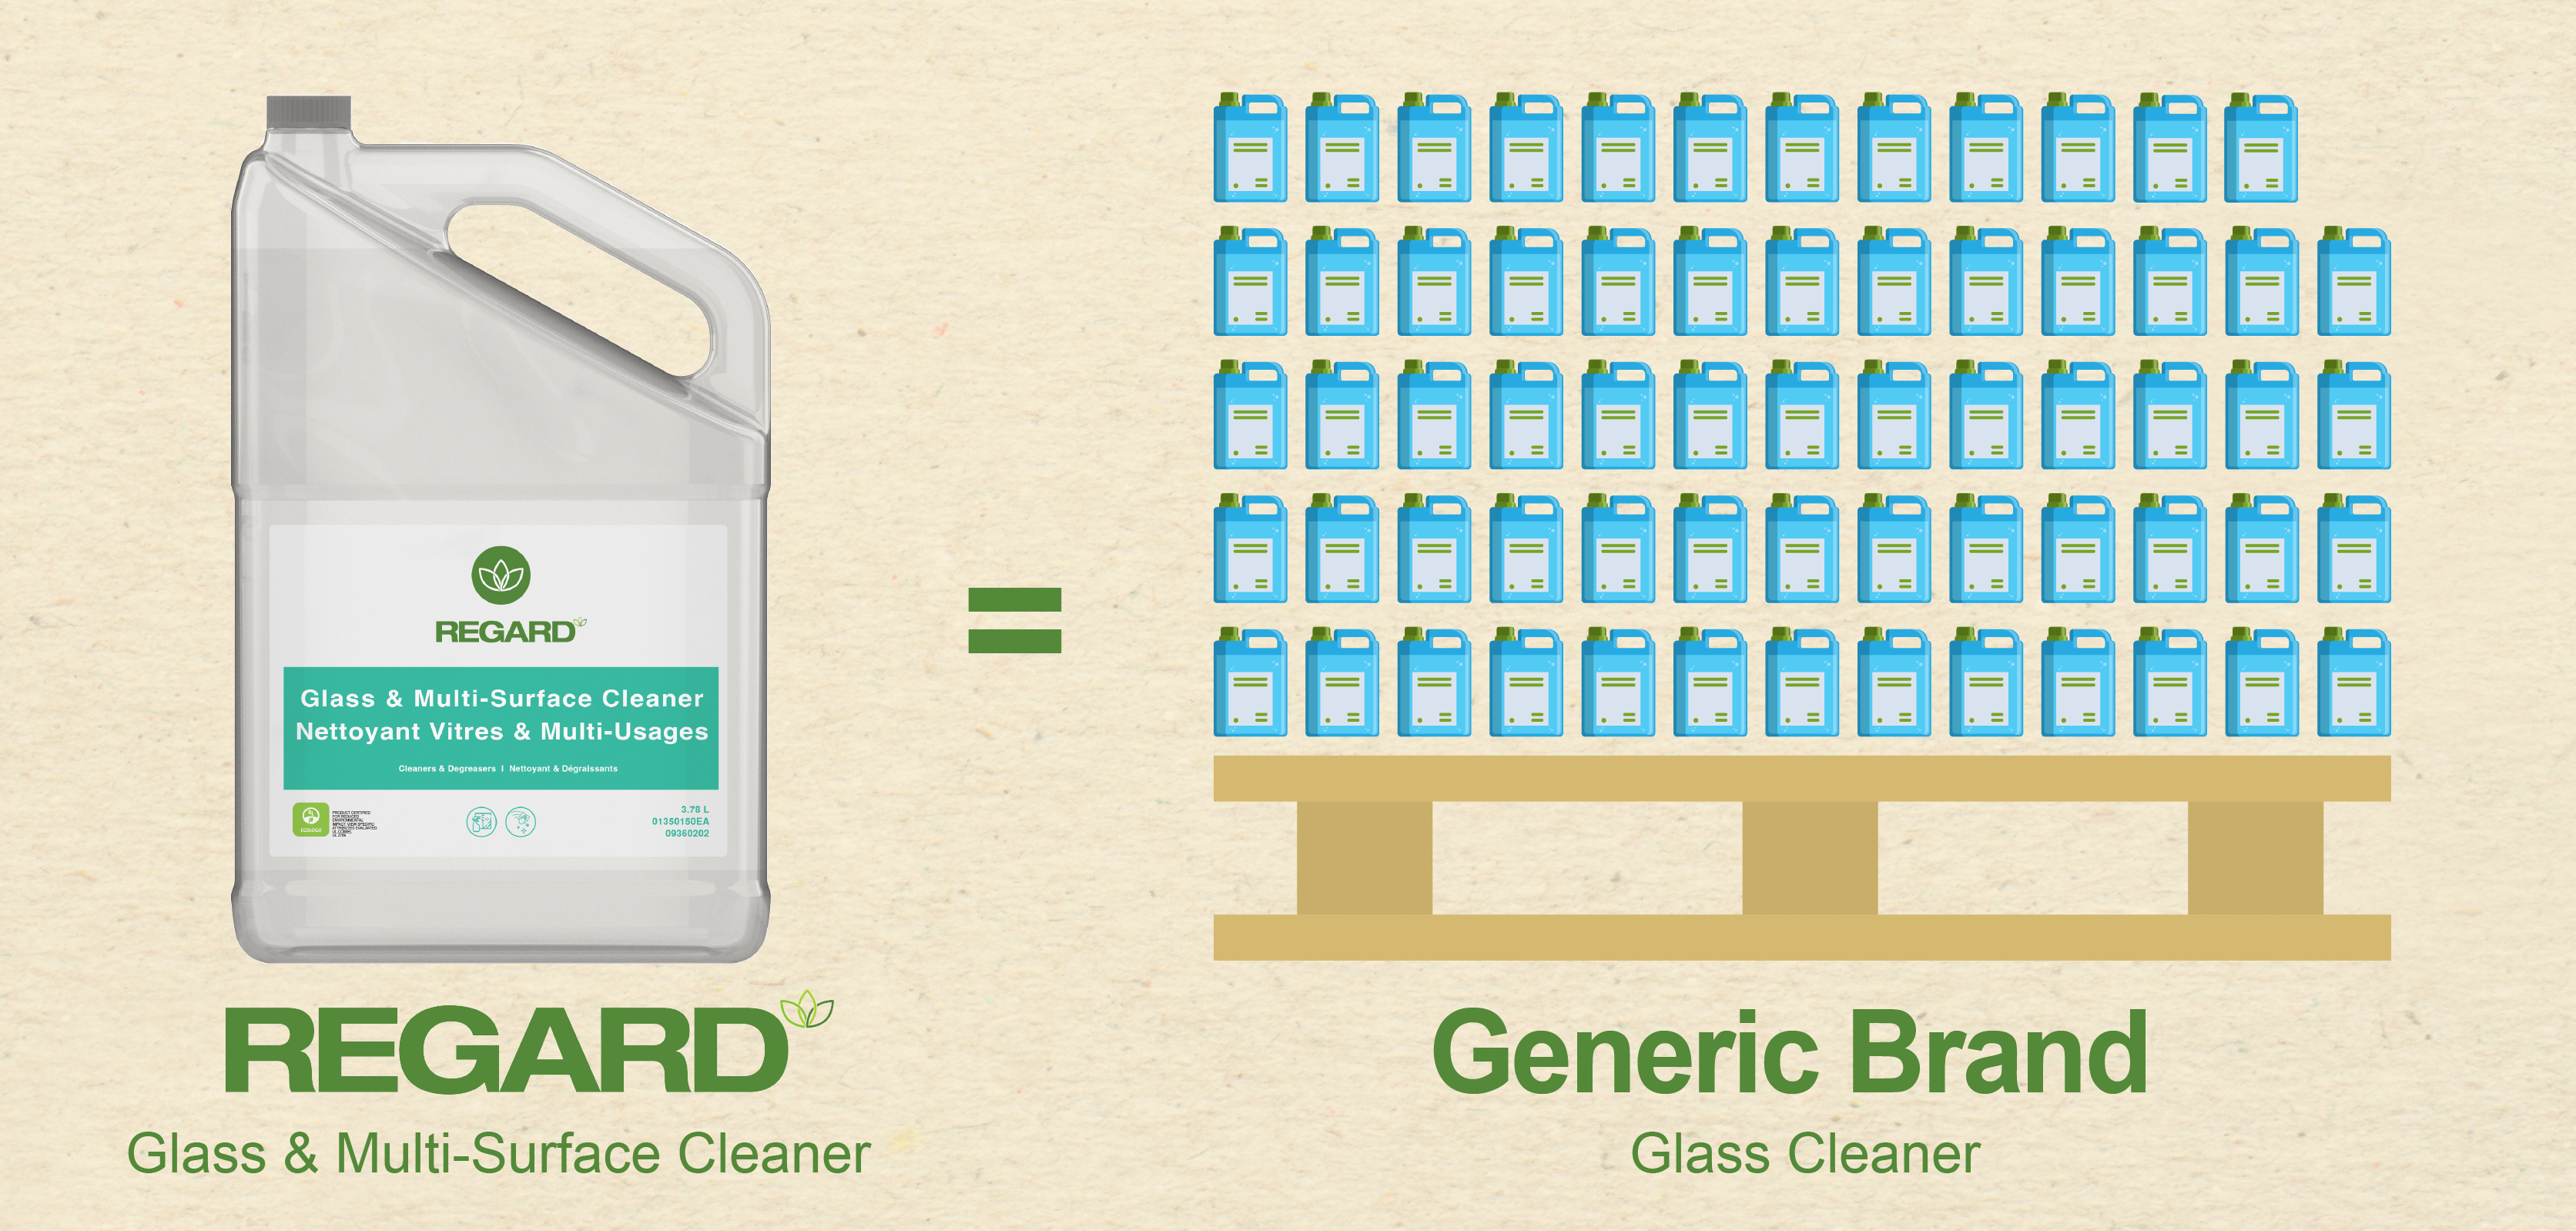 The English version of a simplified comparison between Regard Eco-Friendlier Cleaning Solutions' Glass & Multi-Surface Cleaner and a generic brand